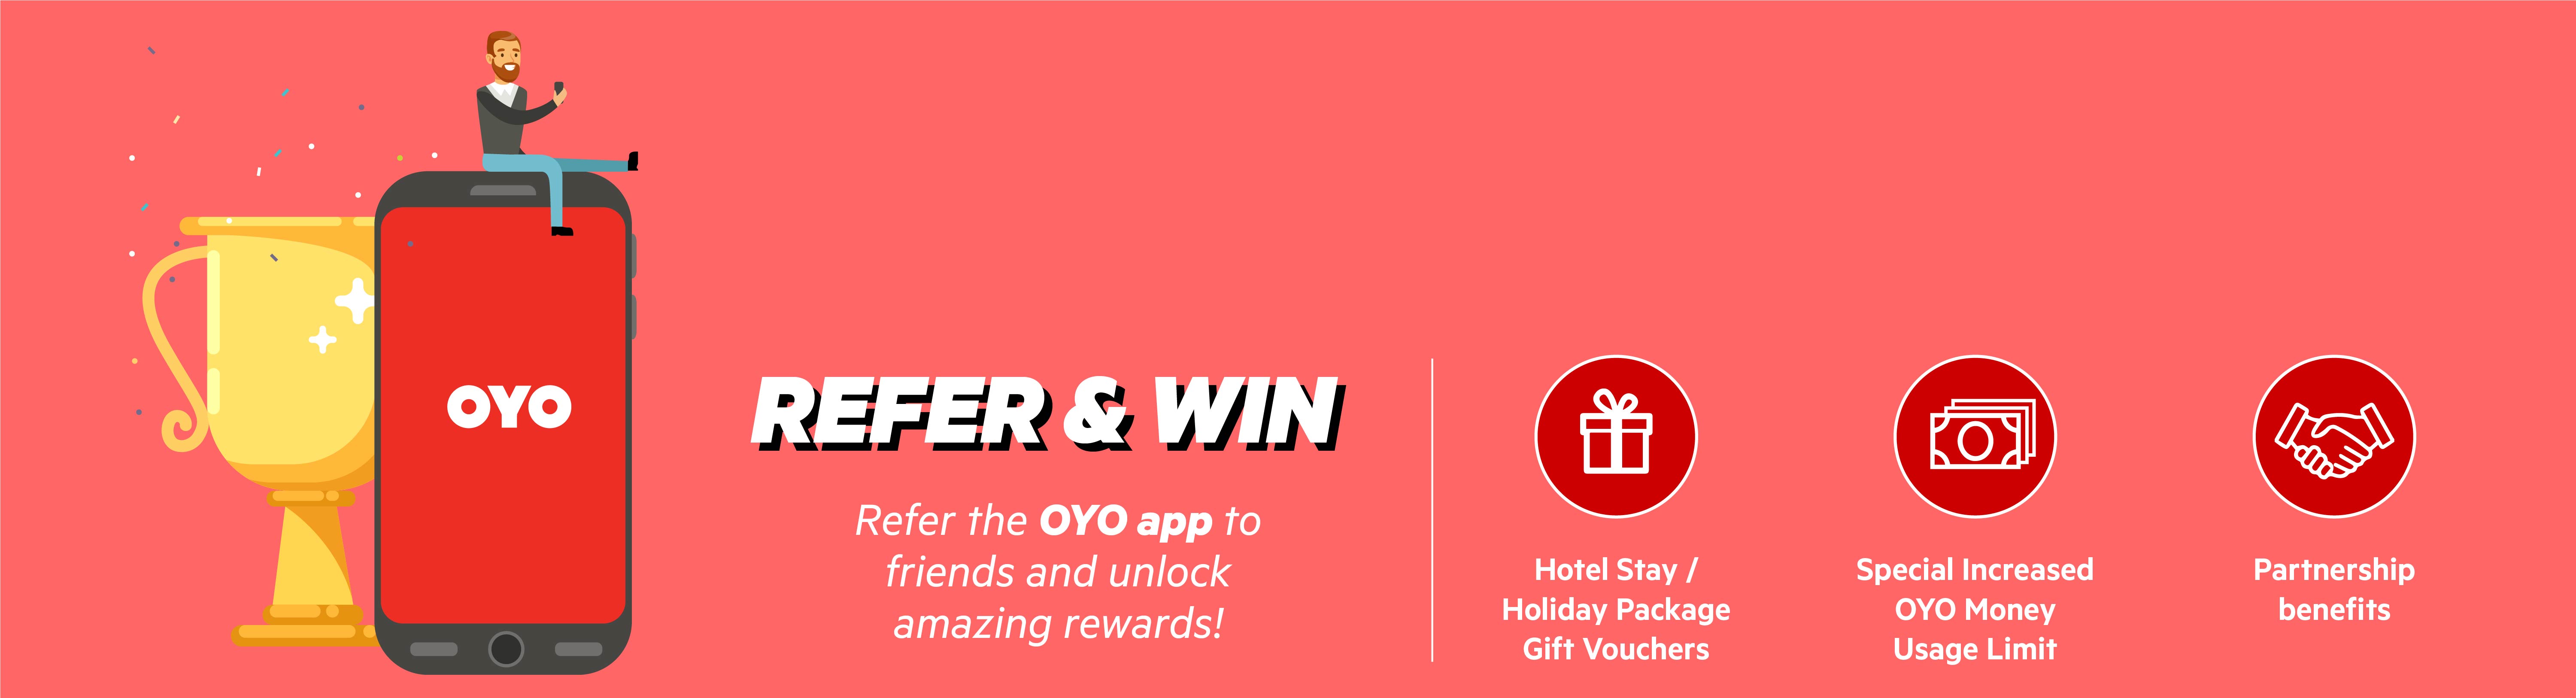 Oyo Refer and Earn Summer Offer